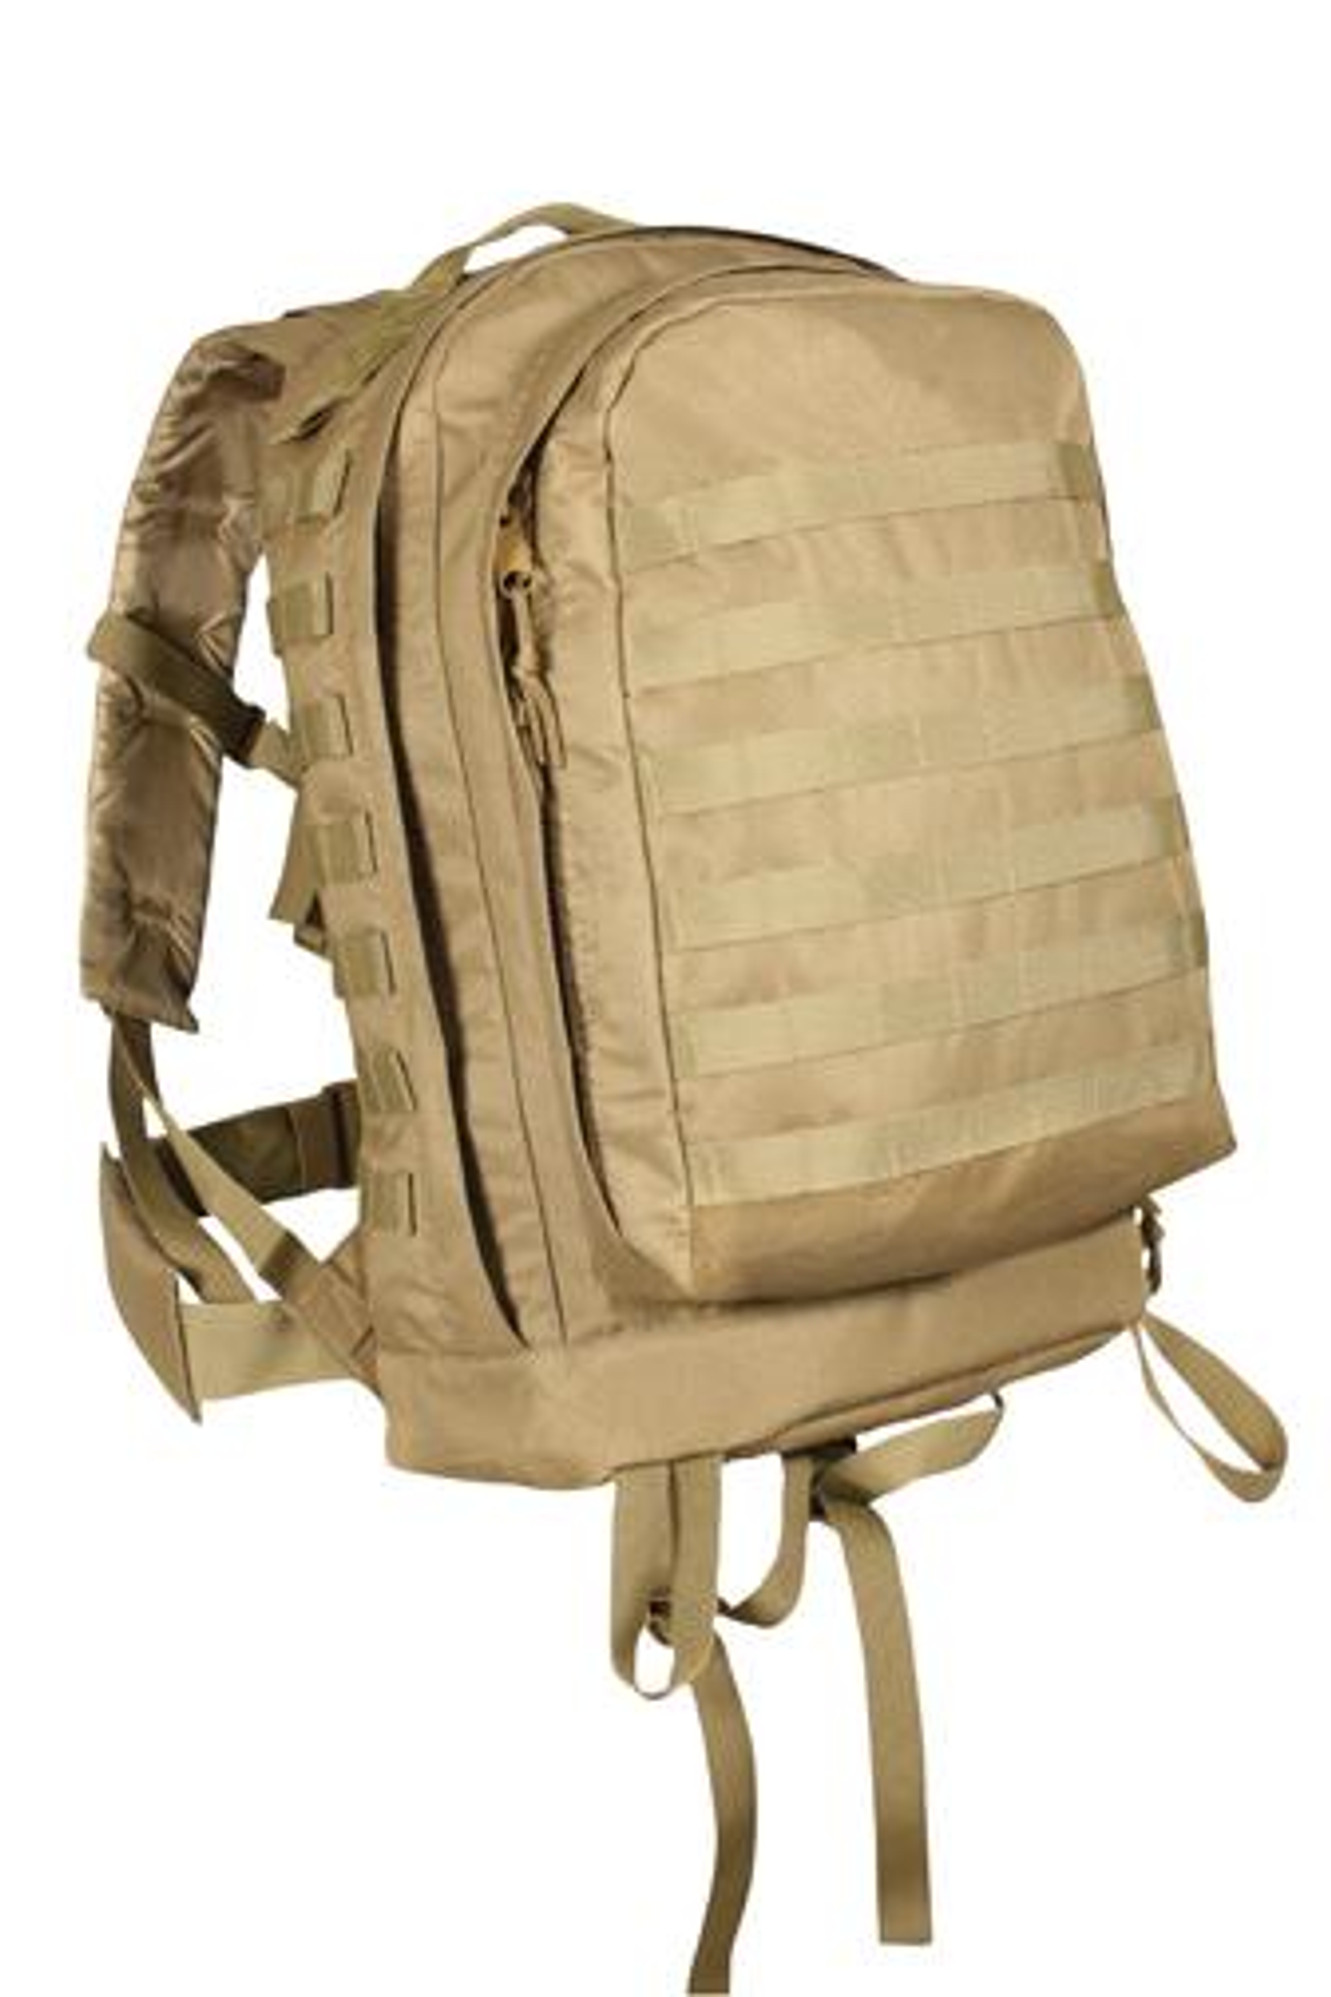 Rothco MOLLE II 3-Day Assault Pack - Coyote Brown